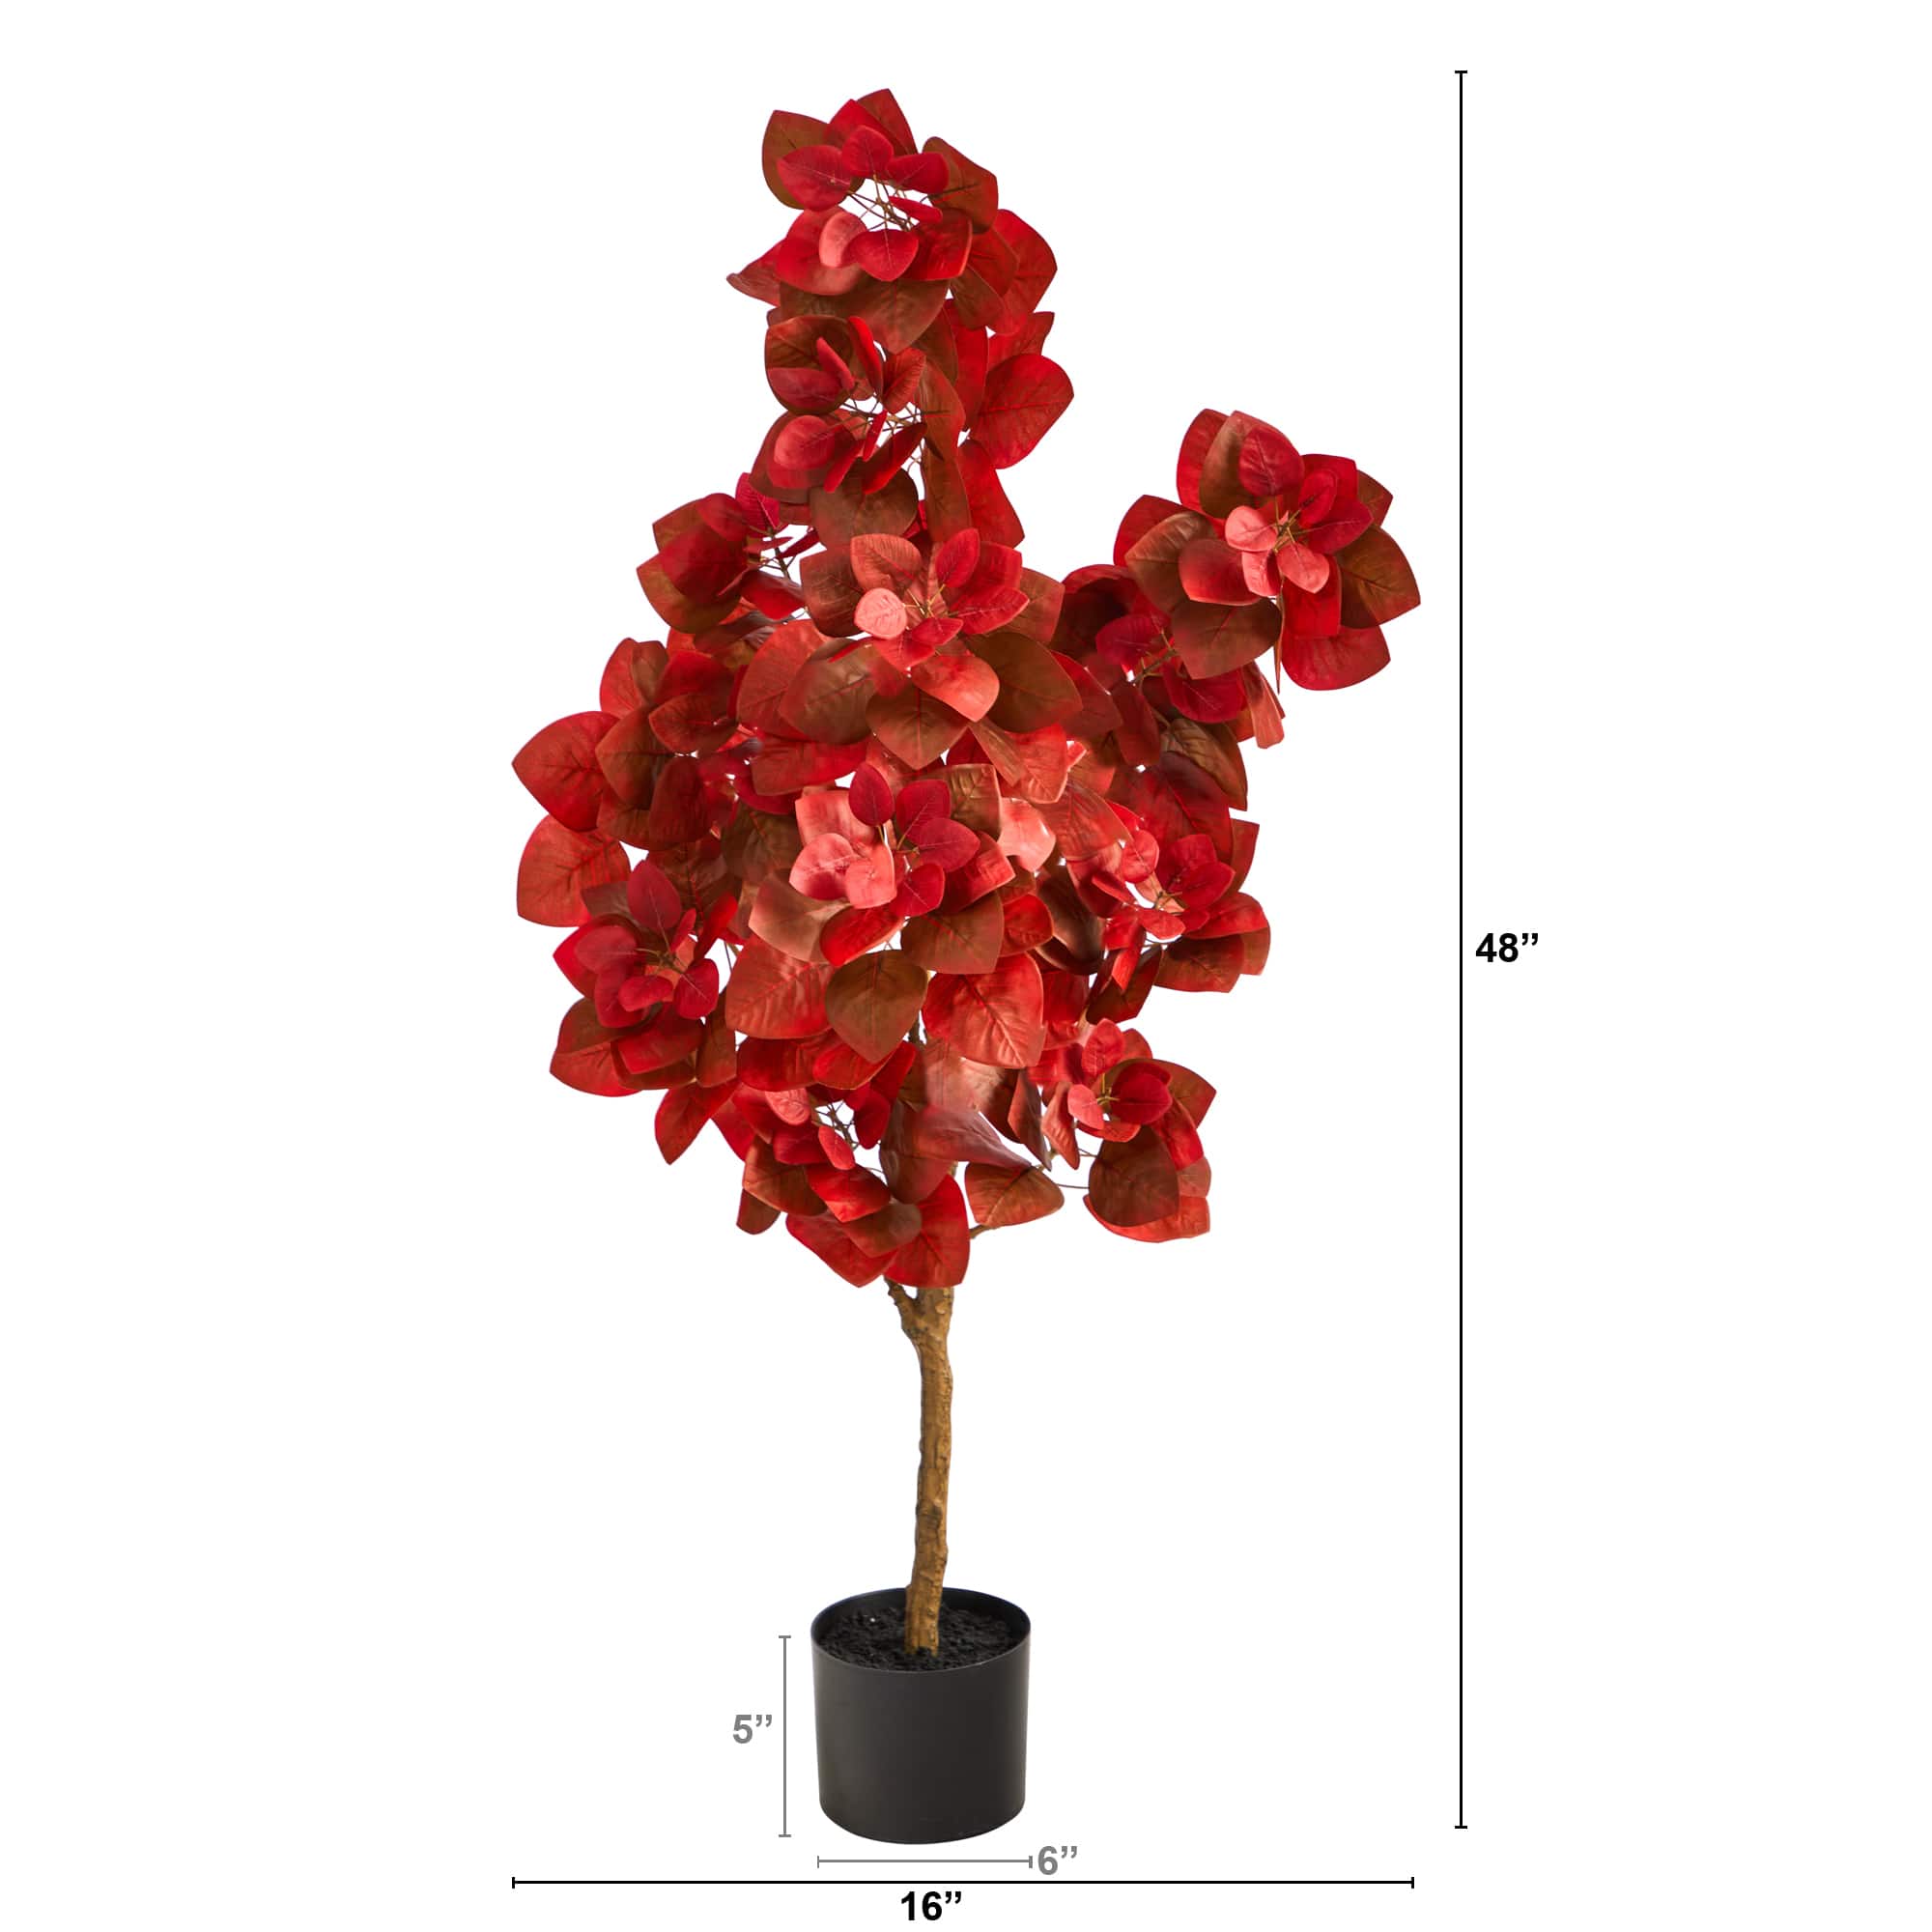 4ft. Potted Autumn Pomegranate Tree